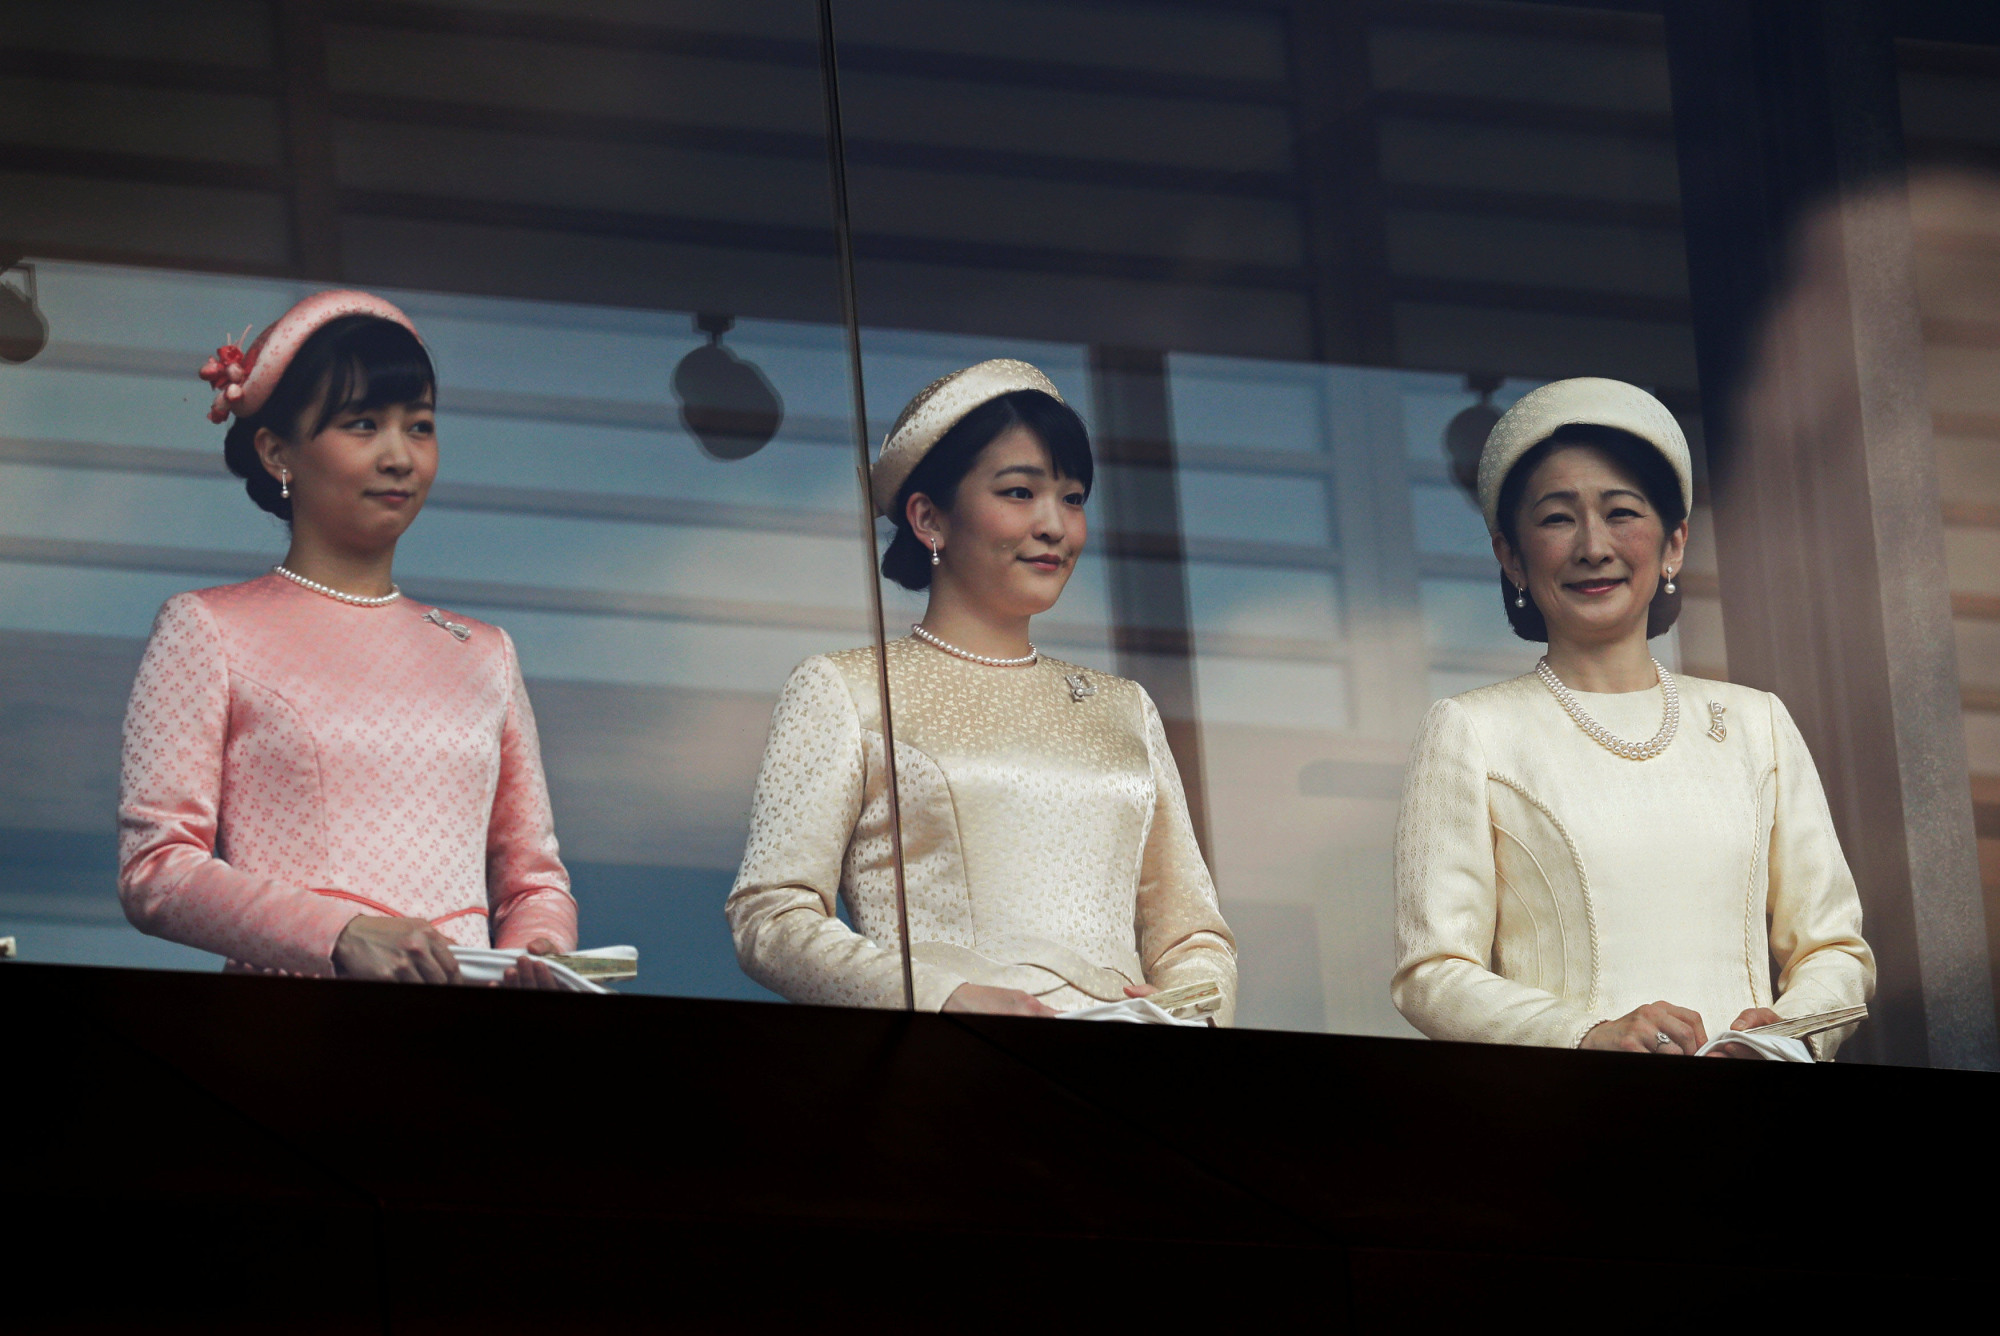 Crown Princess Kiko (right) and her daughters, Princess Mako (center) and Princess Kako, greet well-wishers during a public appearance at the Imperial Palace in Tokyo on Saturday. | REUTERS